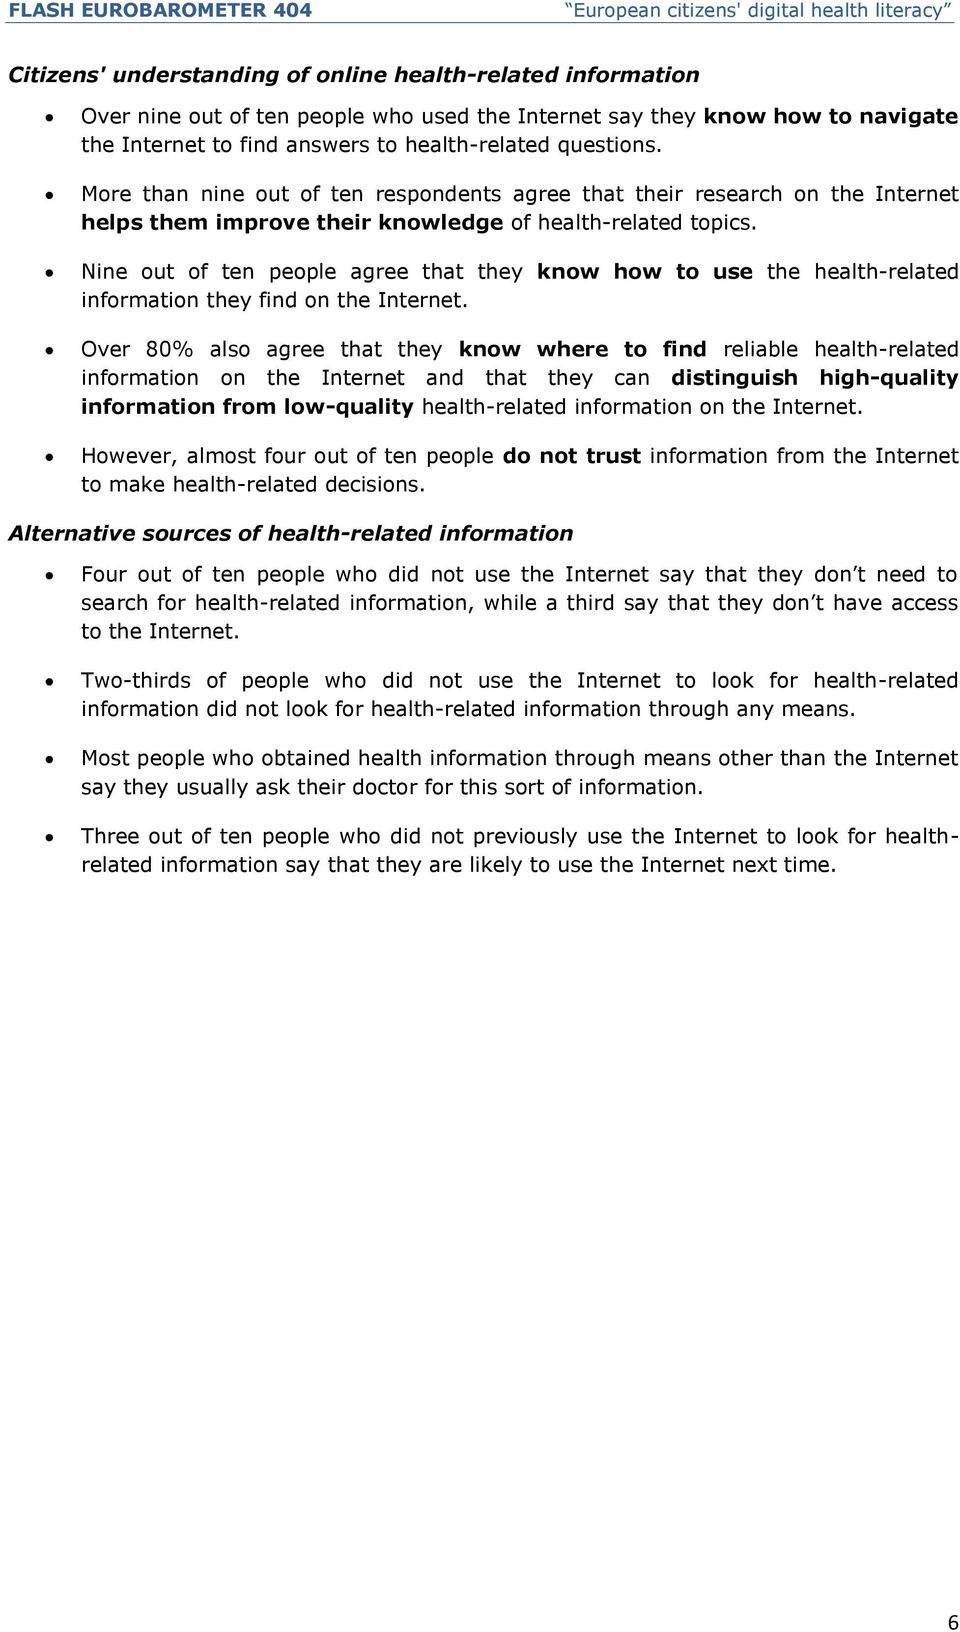 Nine out of ten people agree that they know how to use the health-related information they find on the Internet.